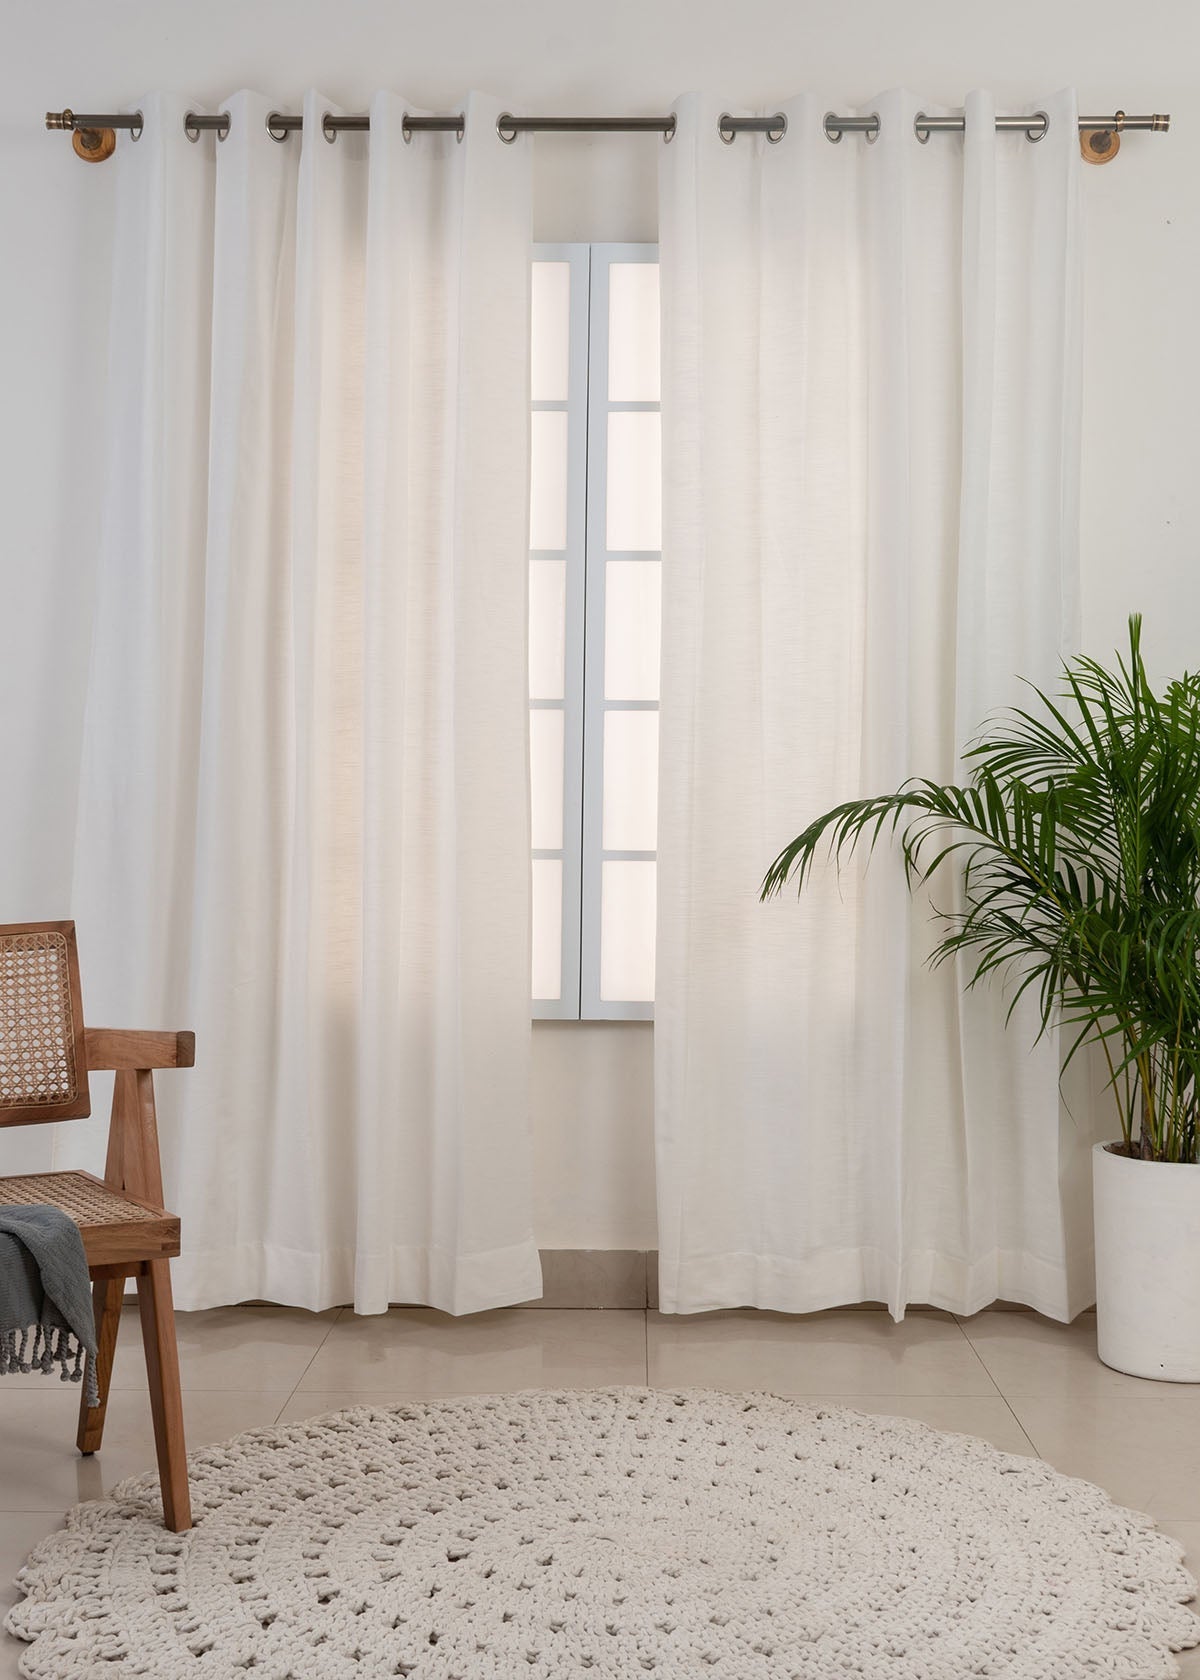 Solid white 100% cotton plain curtain for bedroom - Room darkening - Pack of 1